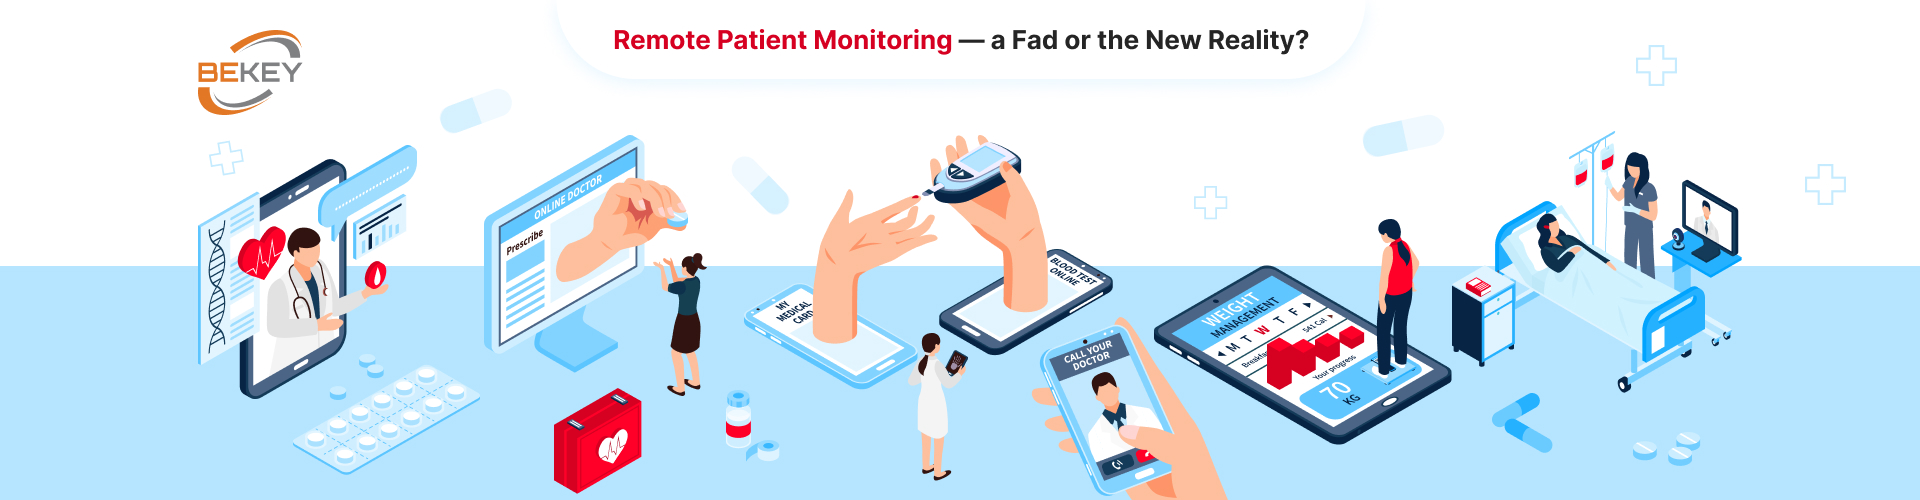 Remote Patient Monitoring — a Fad or the New Reality? - image